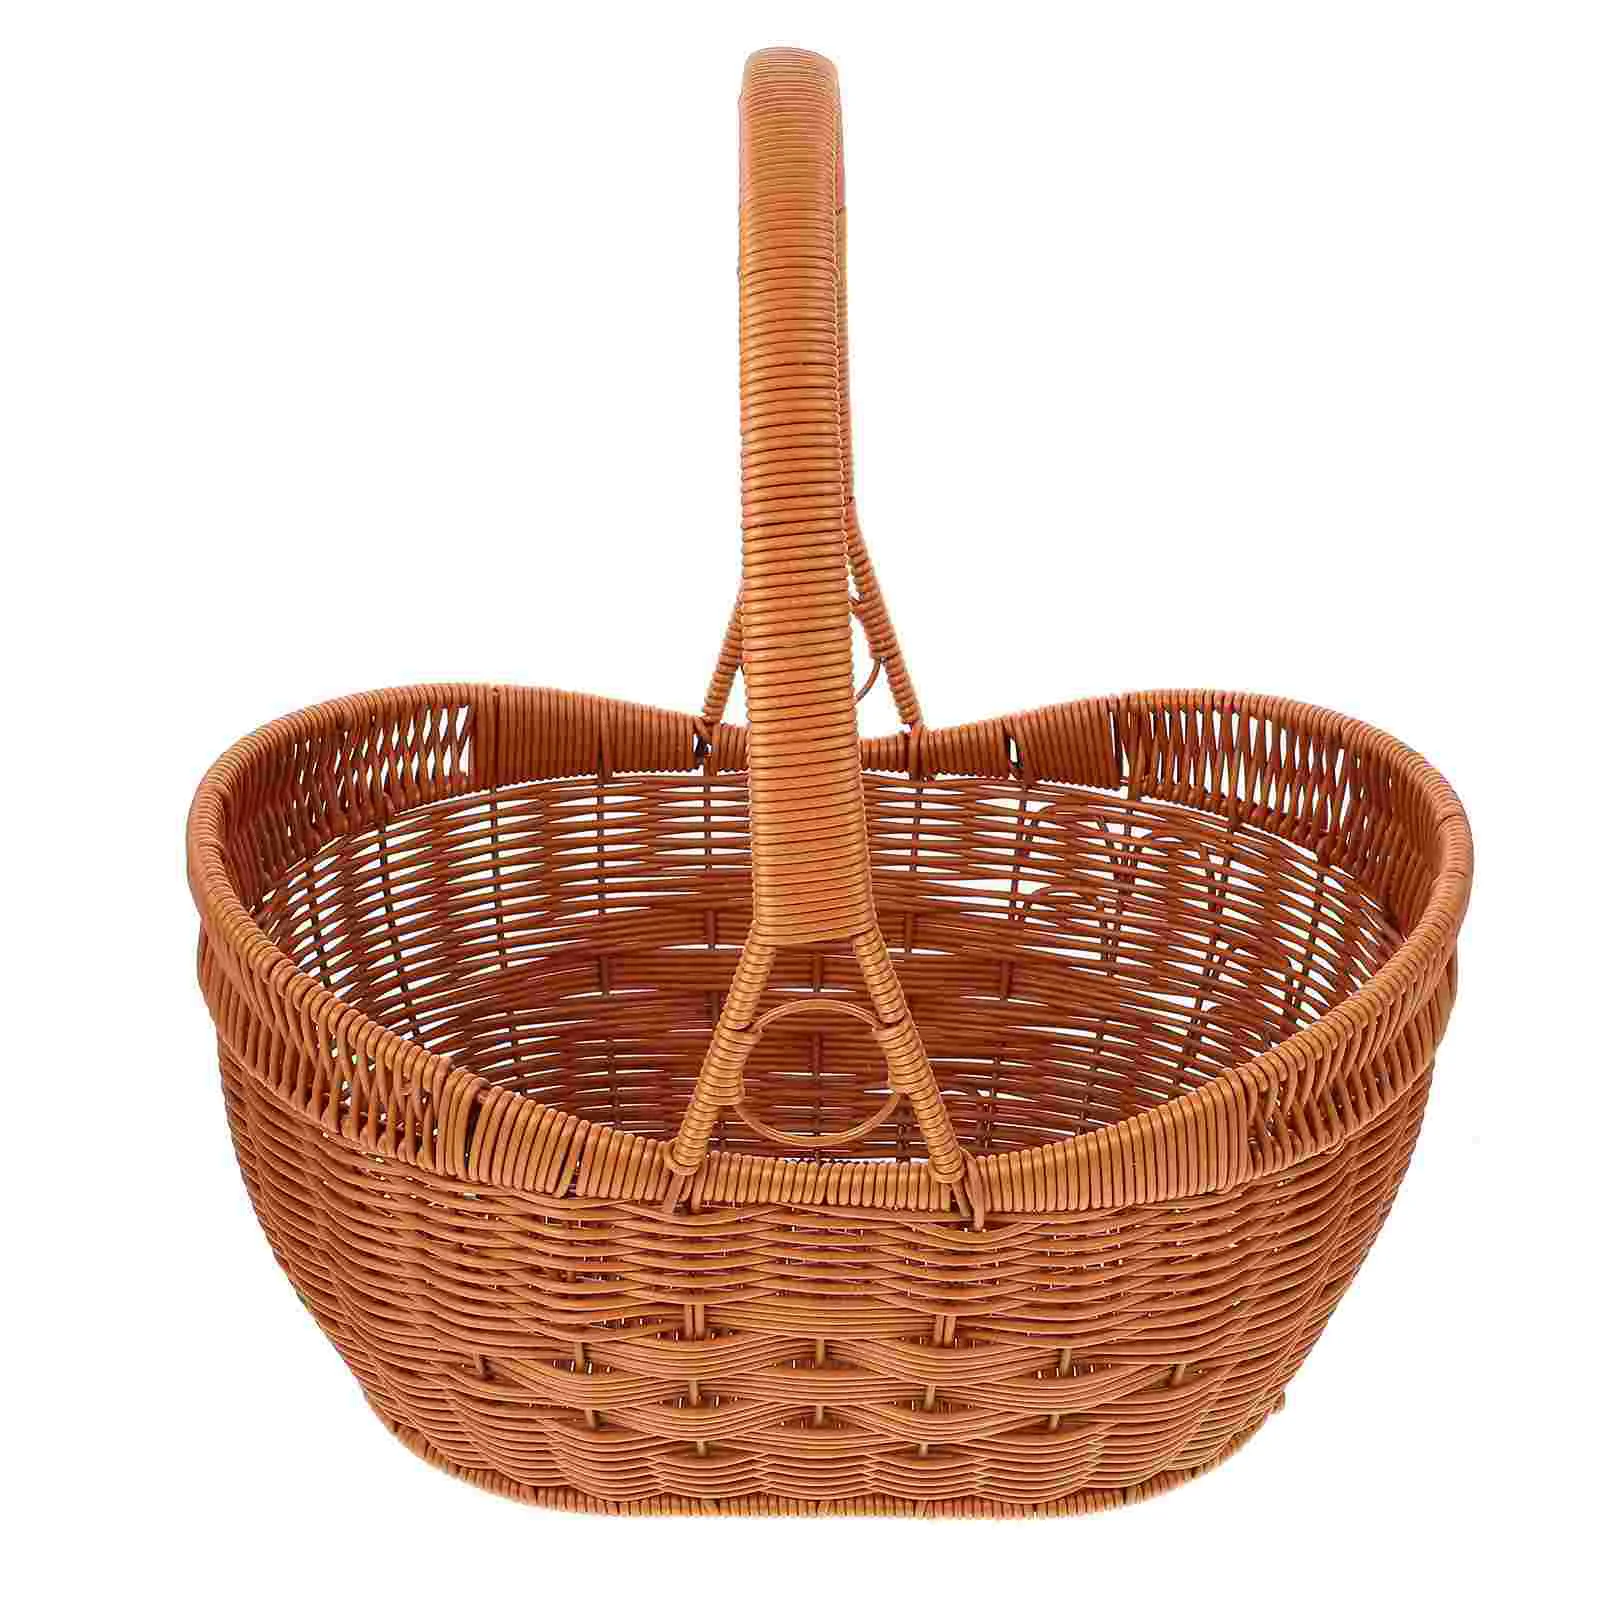 

Desserts Fruits Basket Hand-woven Shopping Vegetable Storage Baskets Grocery Handwoven Picnic